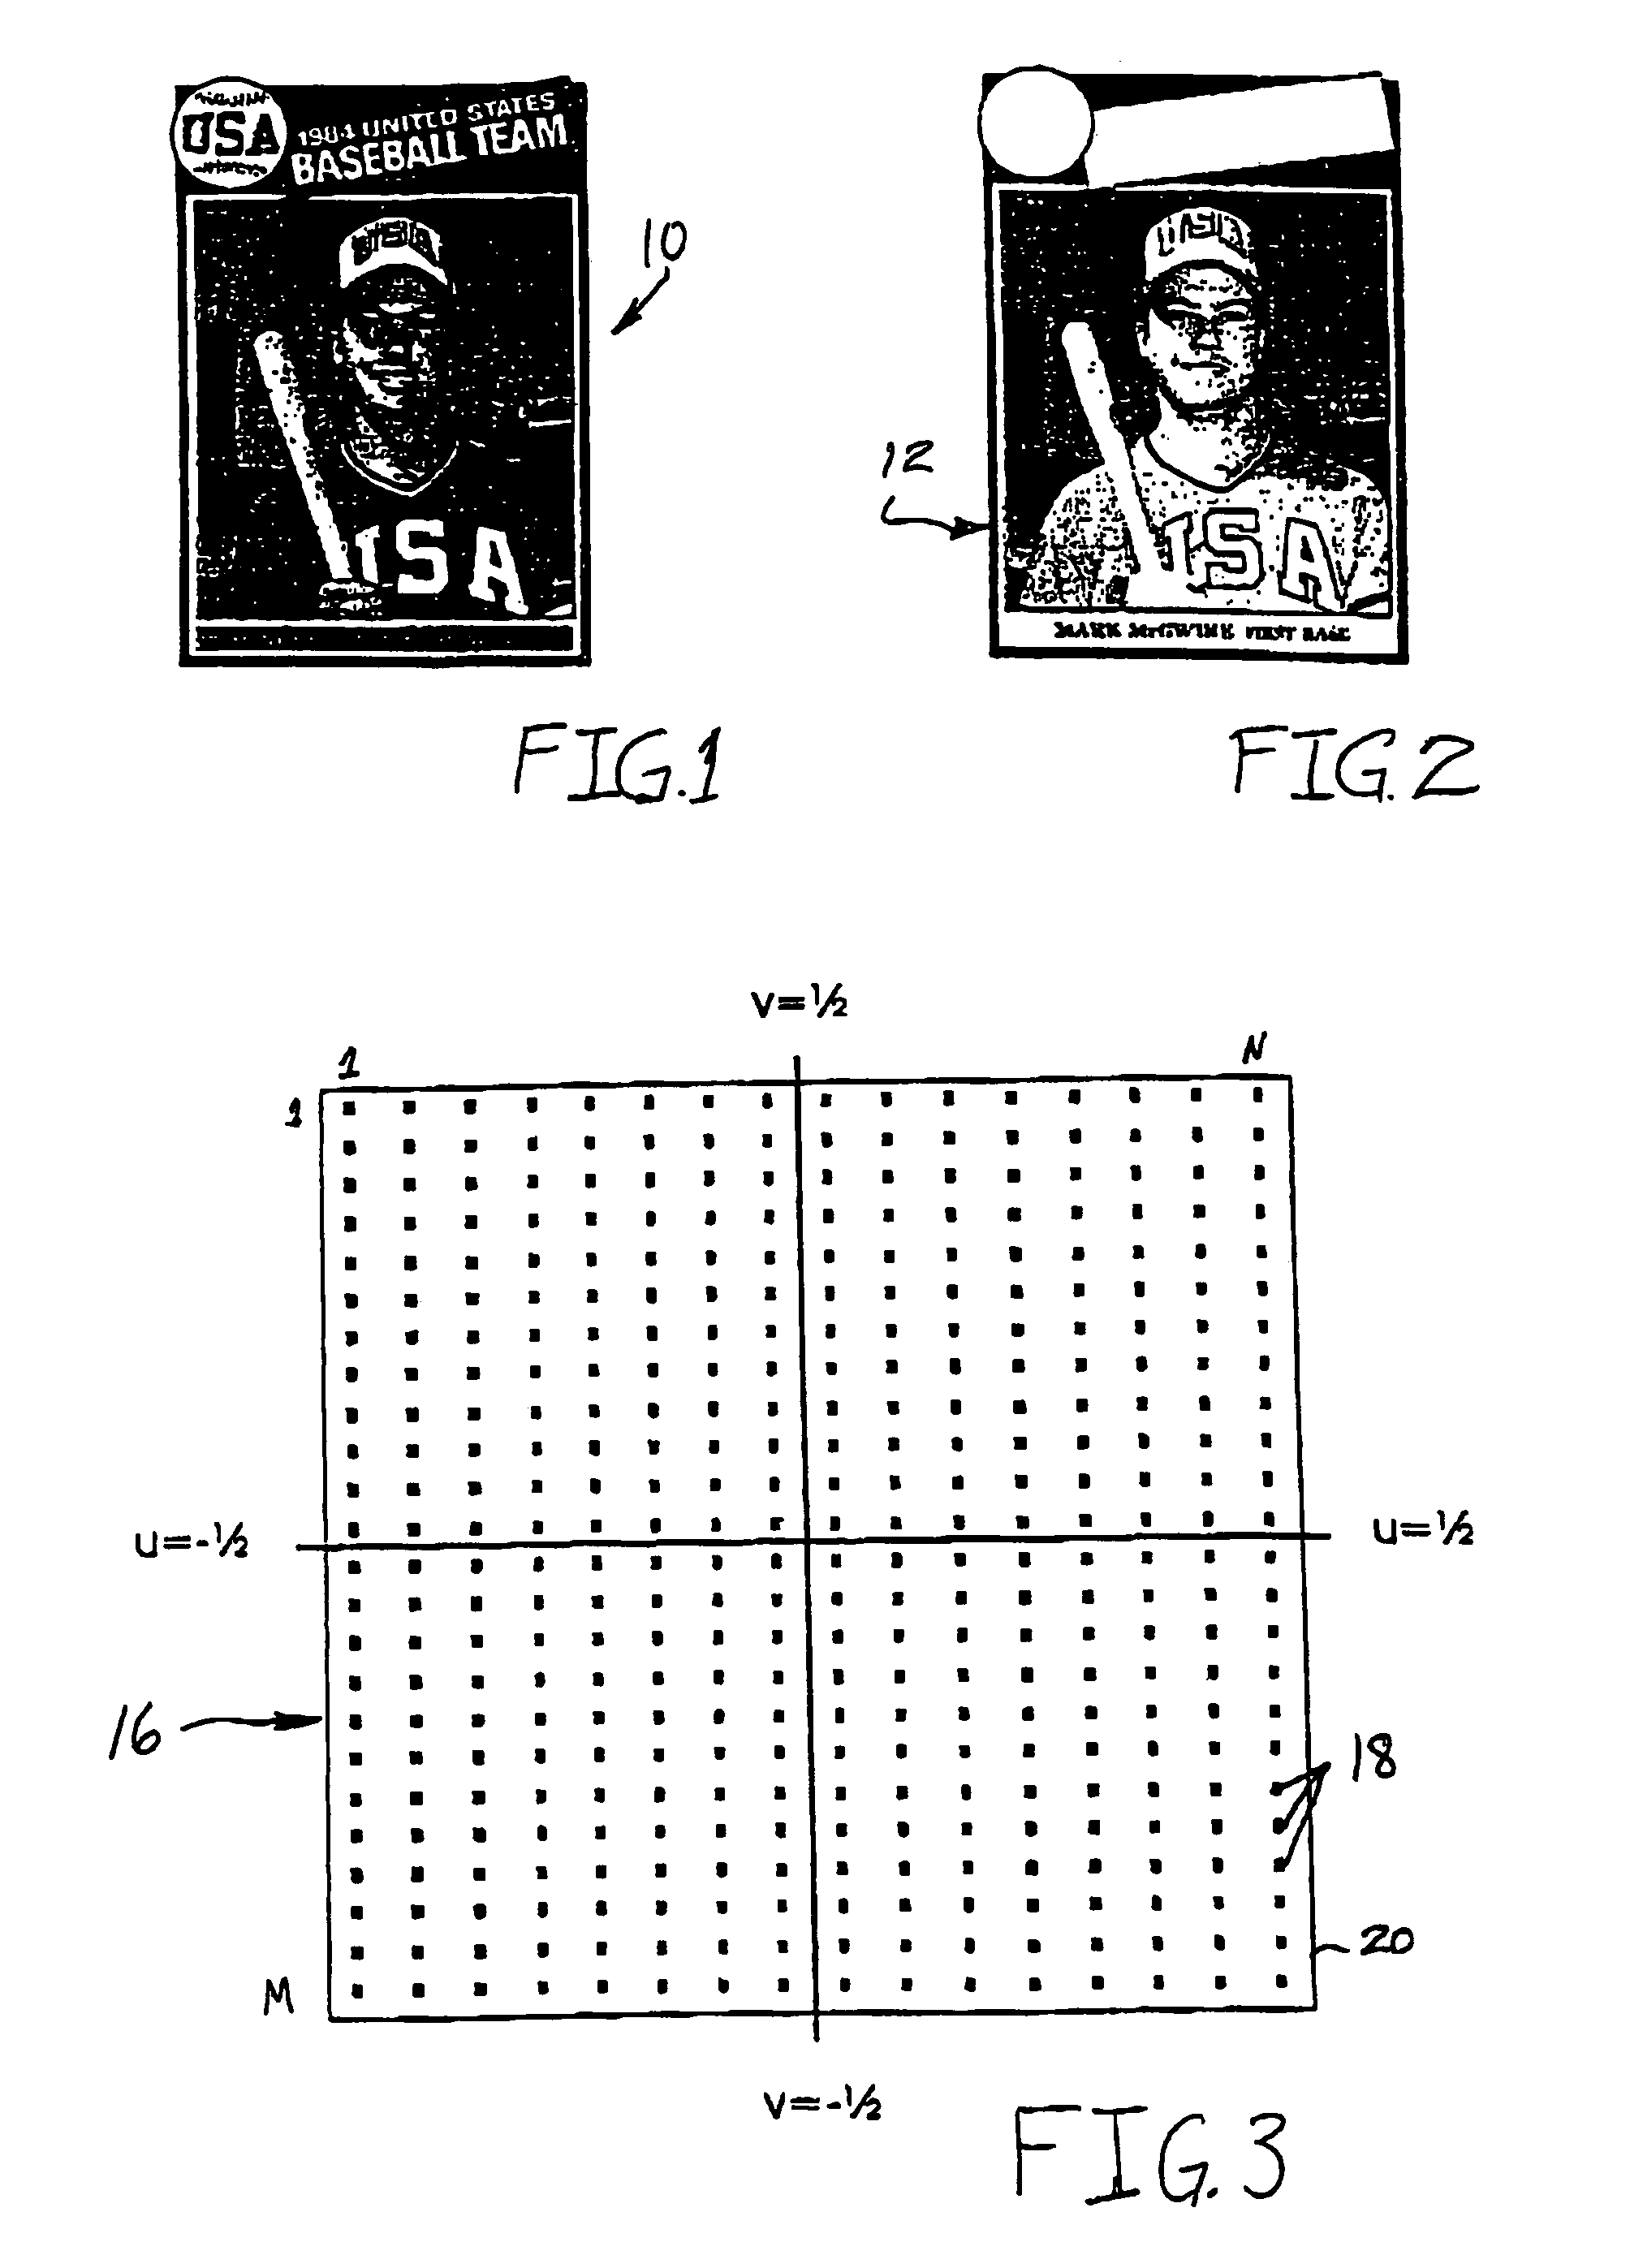 Media tracking system and method